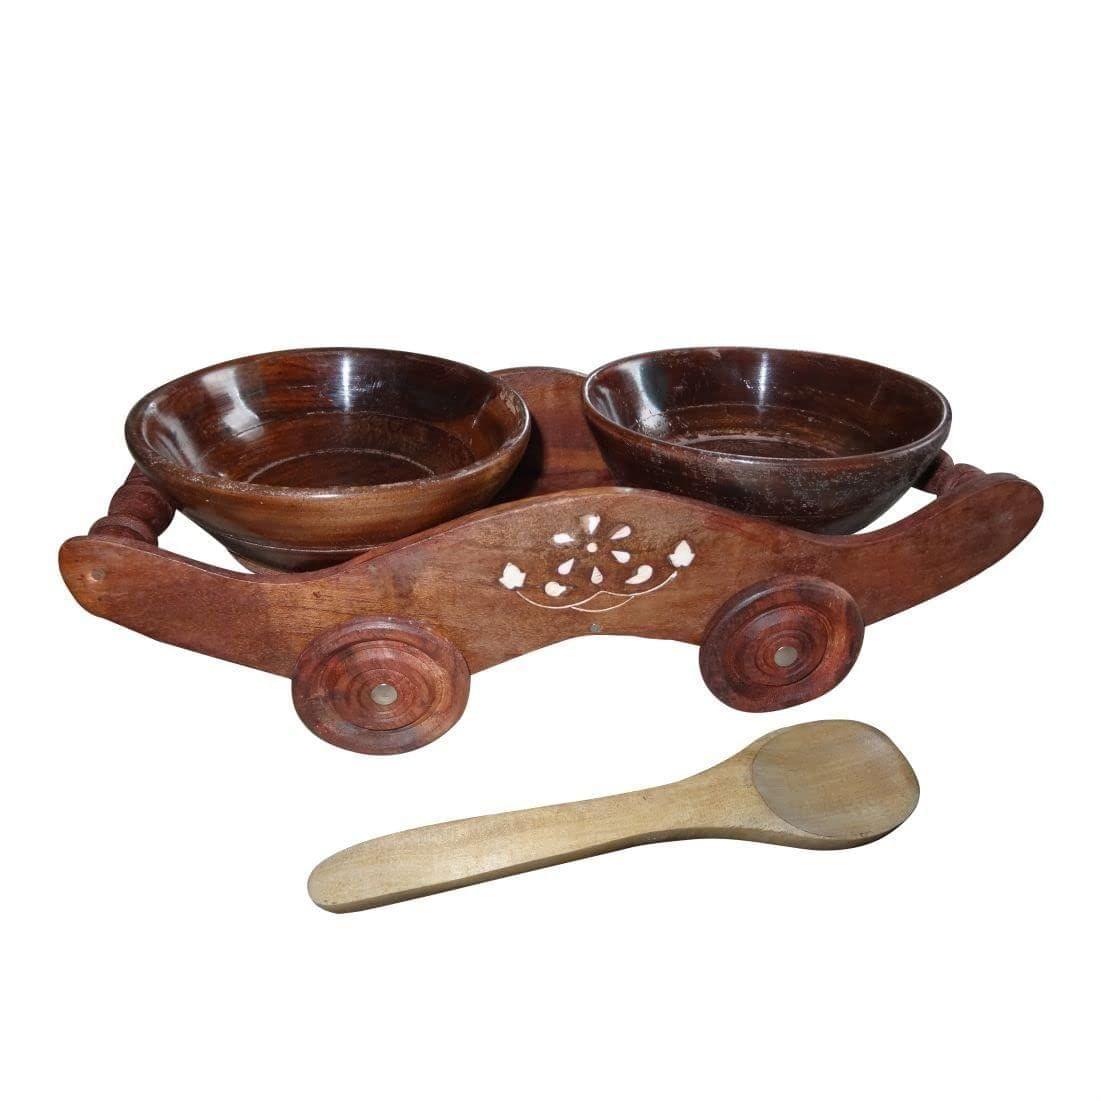 Wooden Trolley Tray with Bowl I Serving Tray with Set of 2 Bowl Tray Serving Set